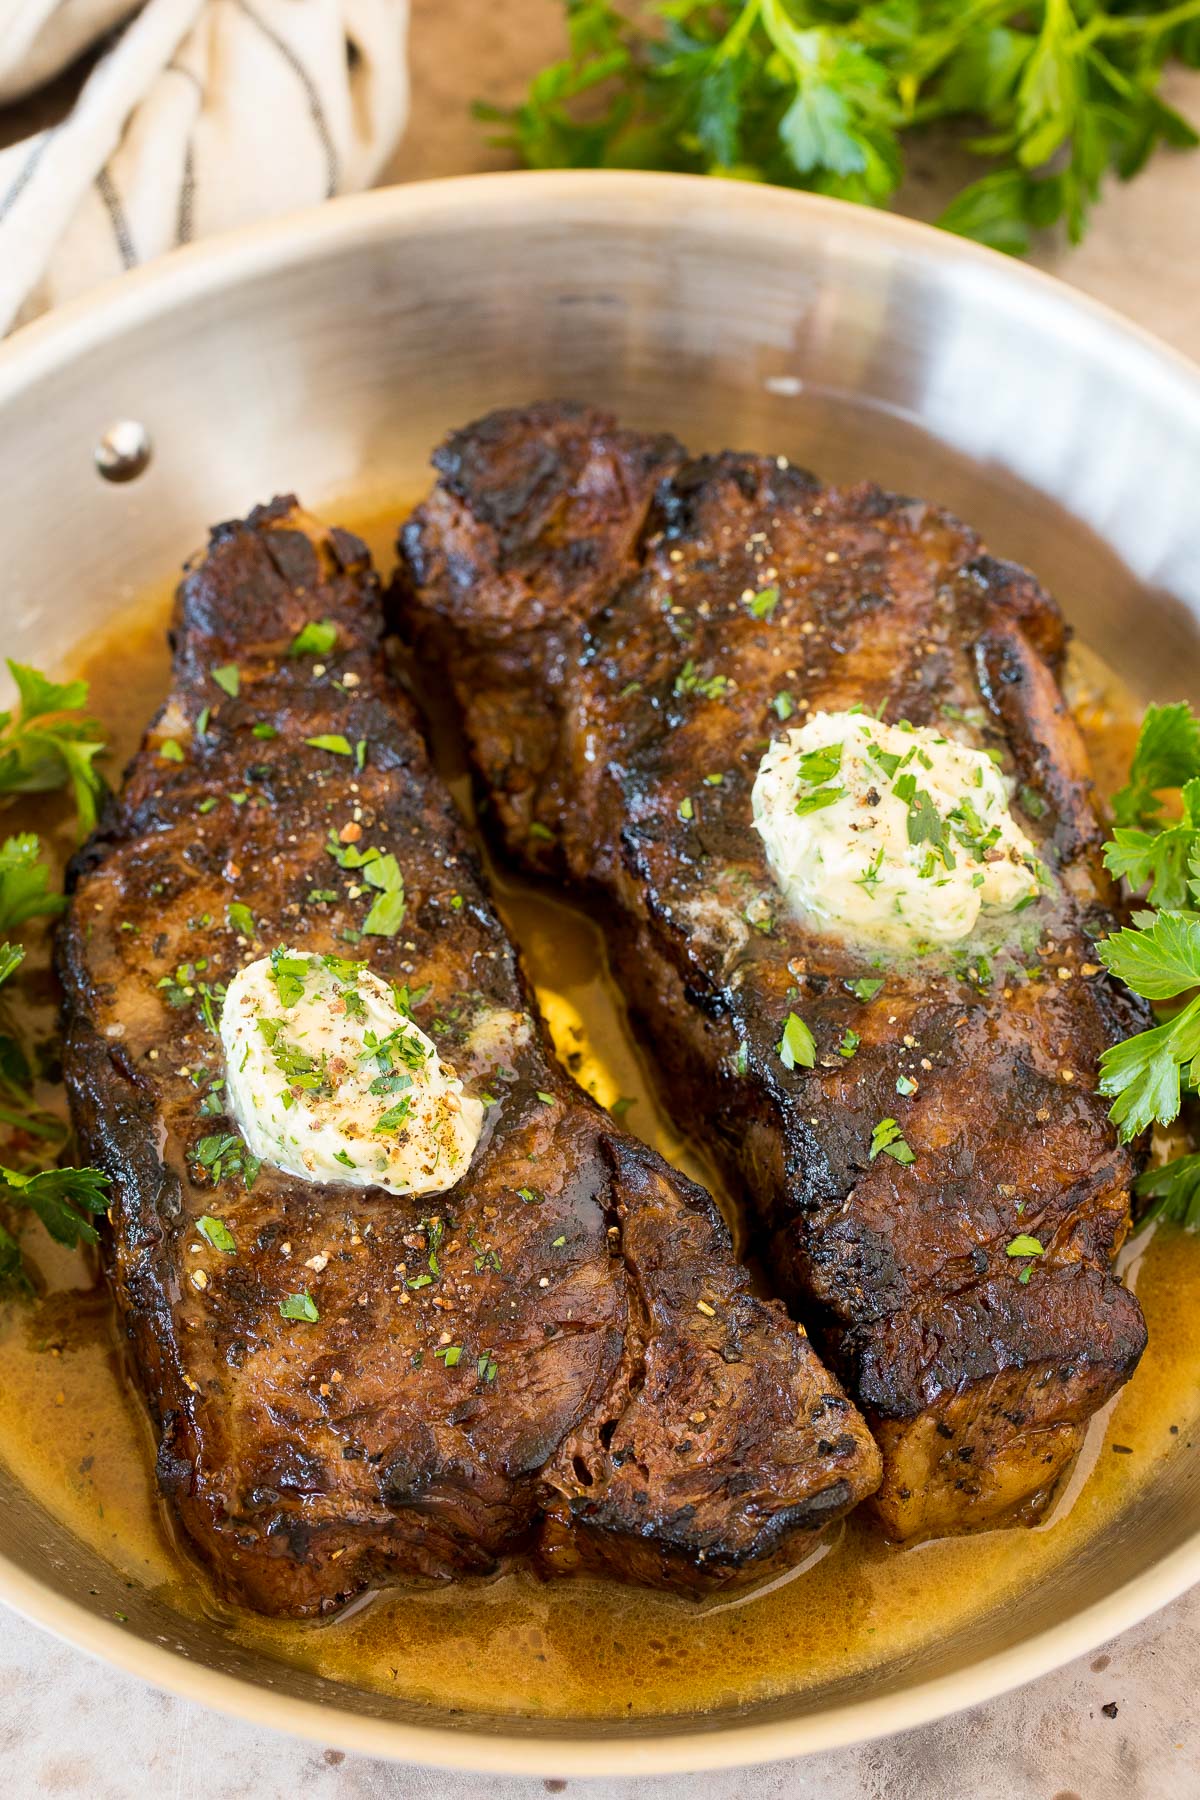 Steaks grilled, sitting in a pan of steak marinade and topped with butter.